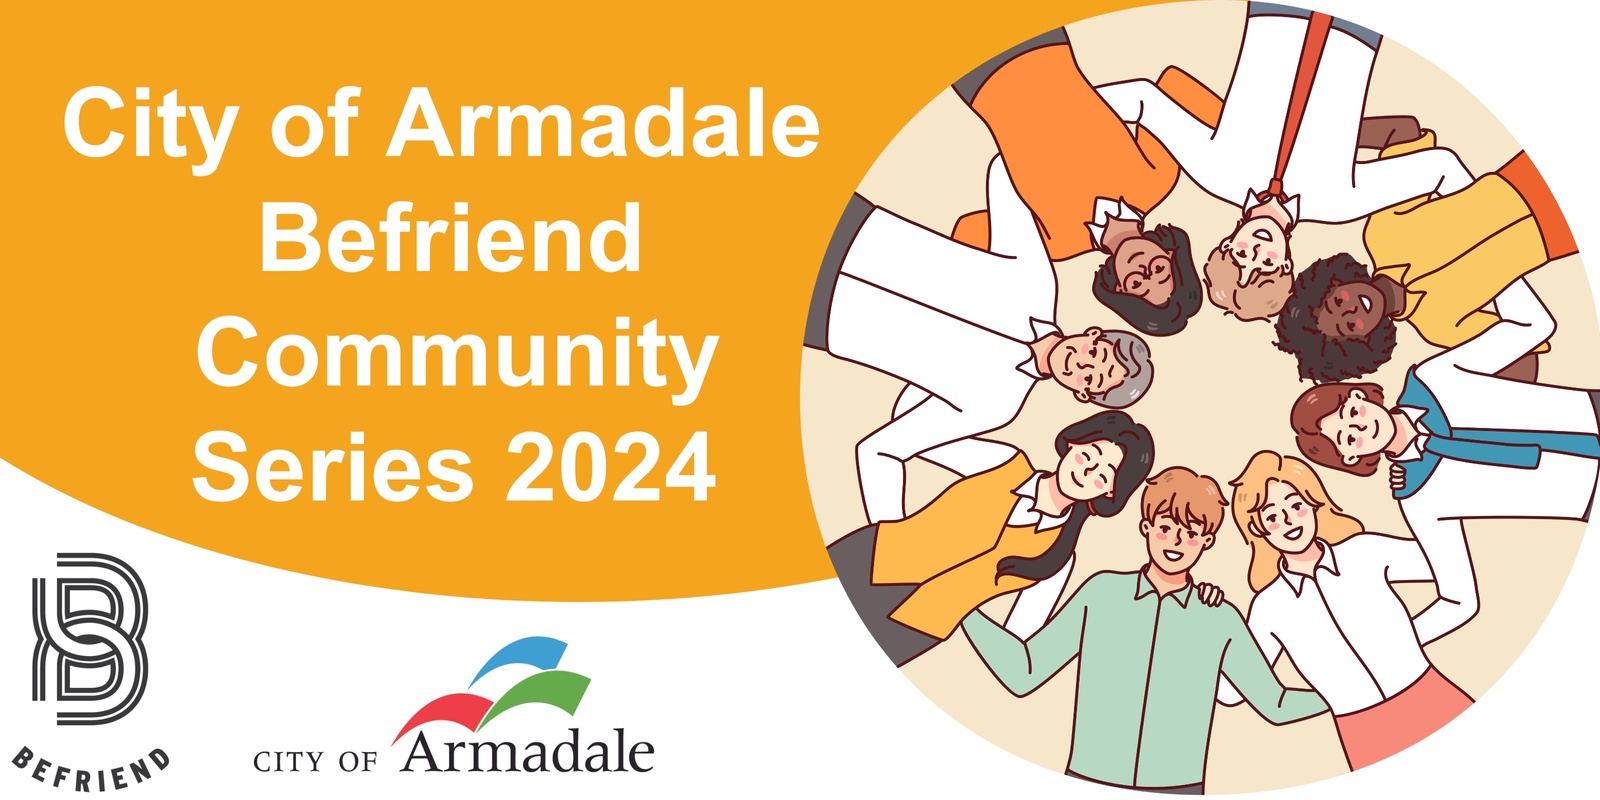 Banner image for City of Armadale Befriend Community Series 2024